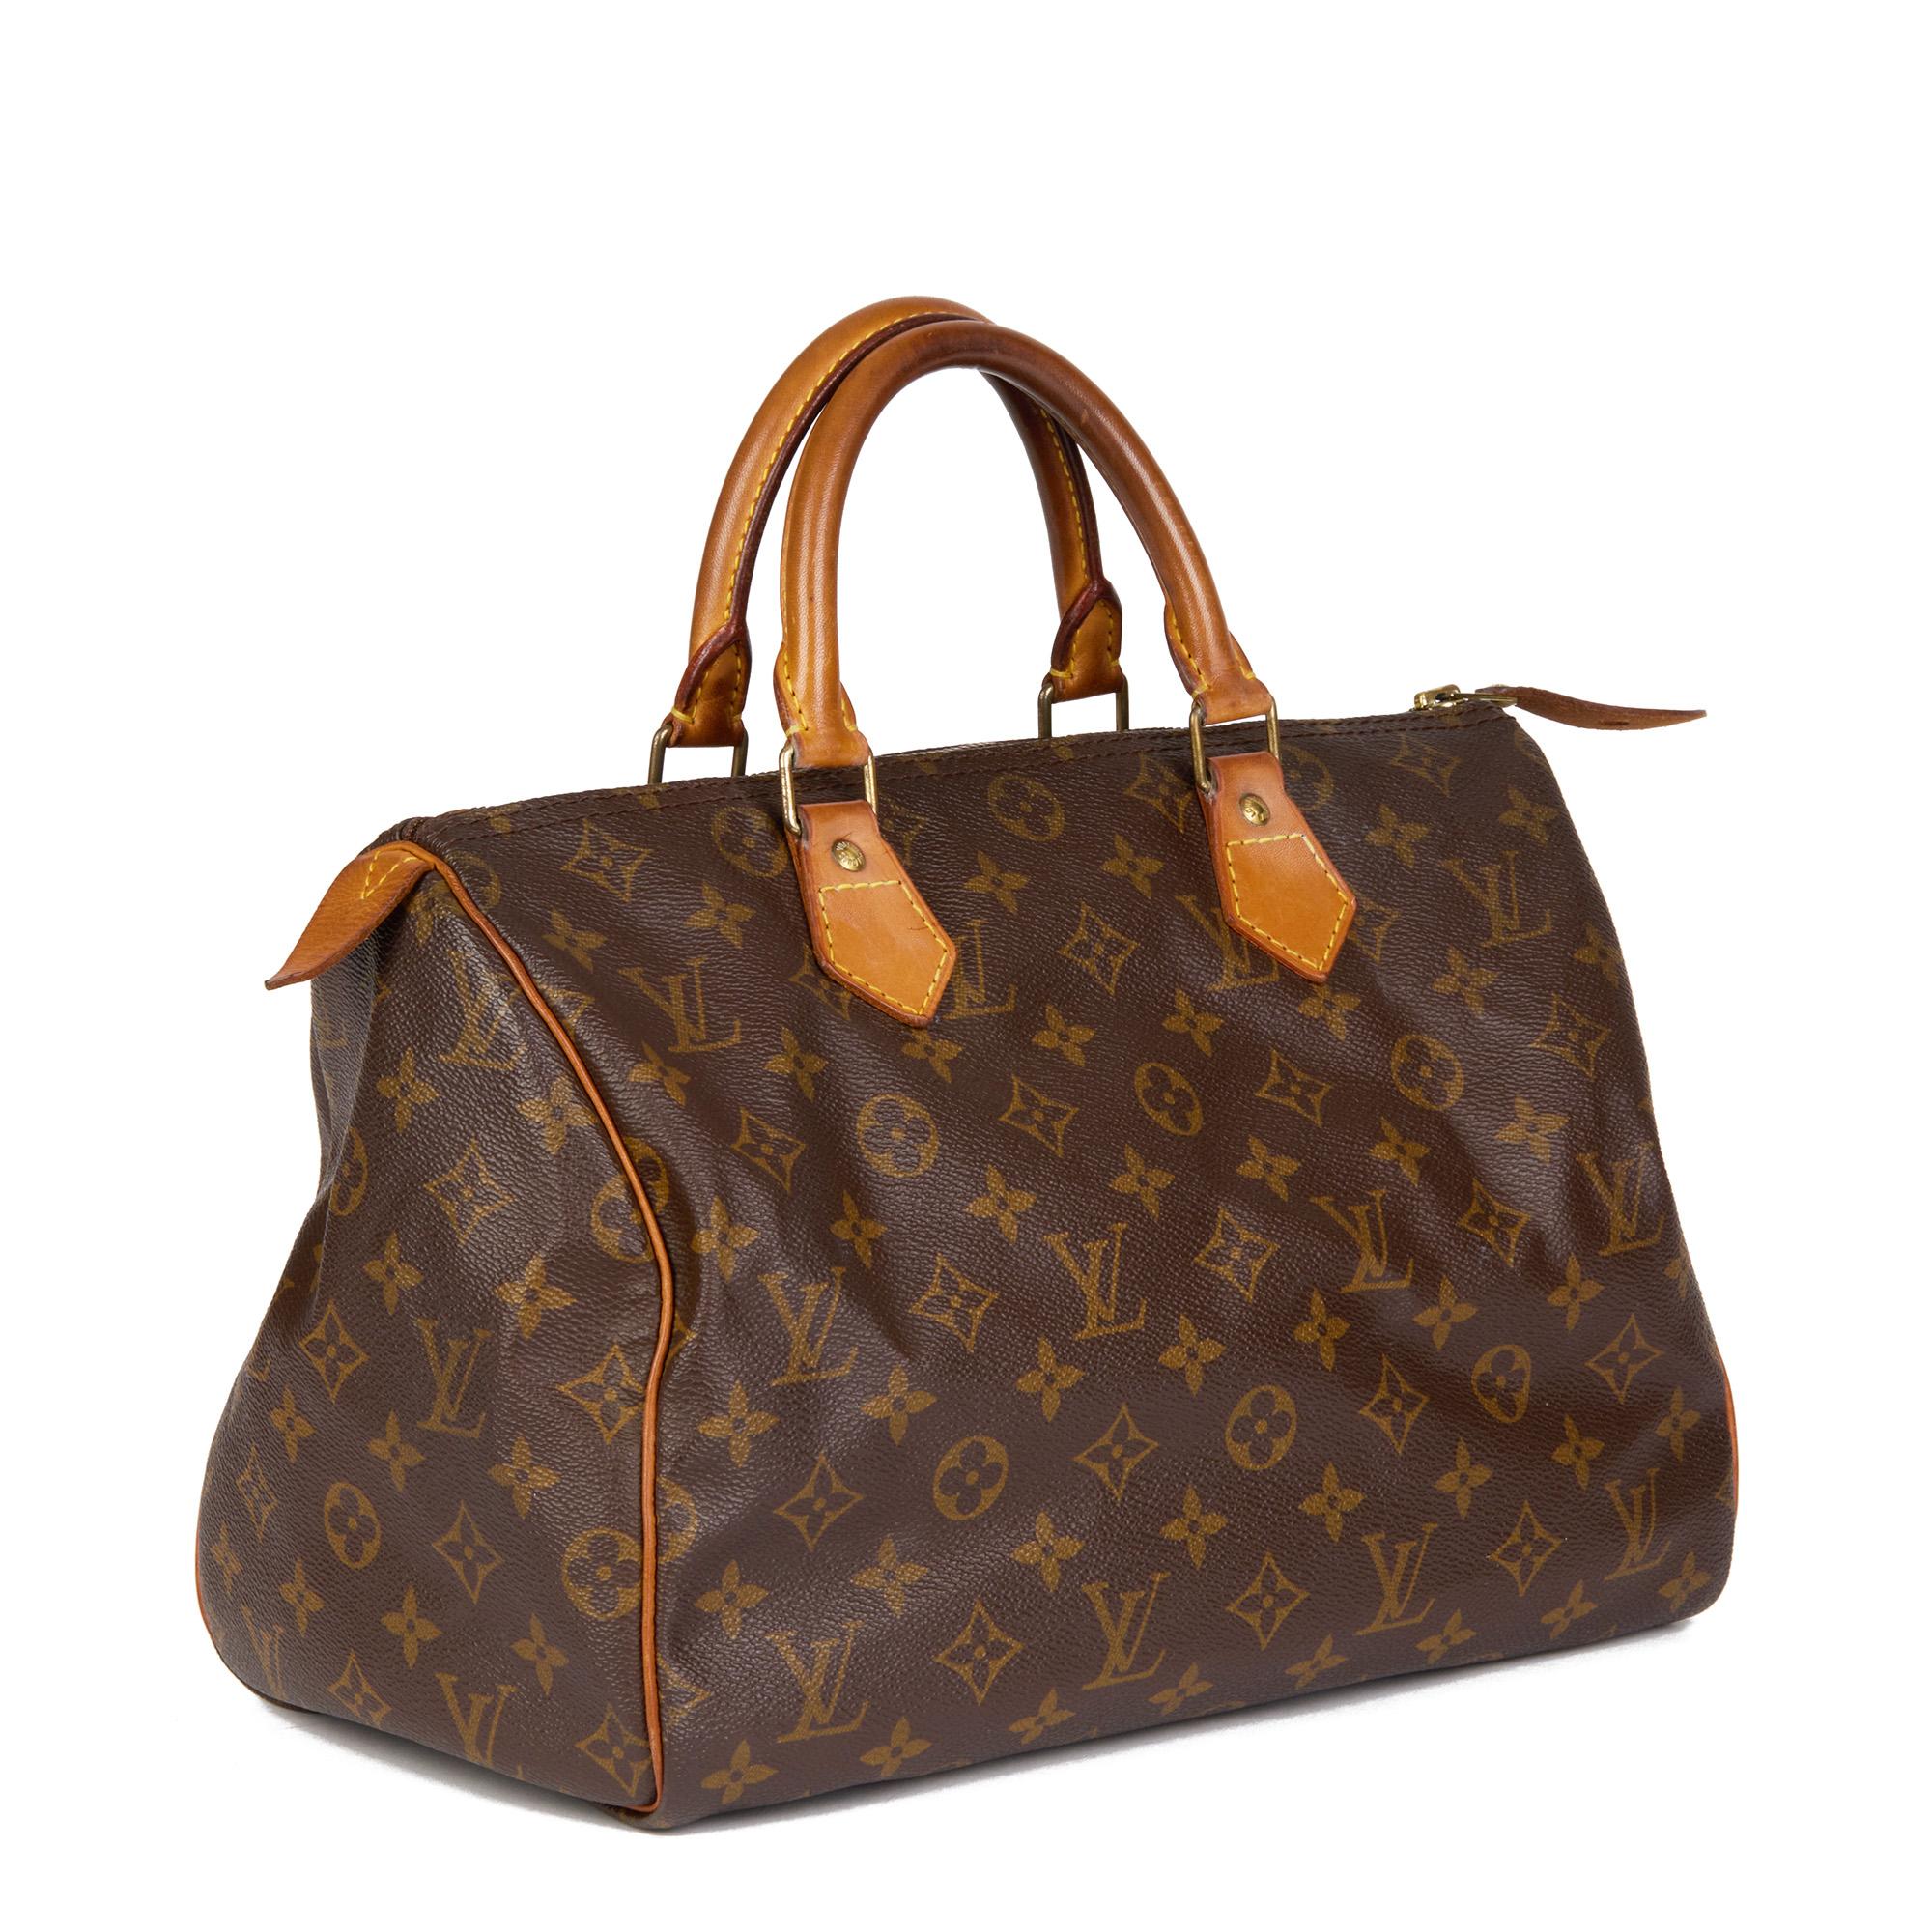 LOUIS VUITTON
Brown Monogram Coated Canvas & Vachetta Leather Vintage Speedy 30

Xupes Reference: CB657
Serial Number: VI0933
Age (Circa): 1993
Authenticity Details: Date Stamp (Made in France)
Gender: Ladies
Type: Tote

Colour: Brown
Hardware: